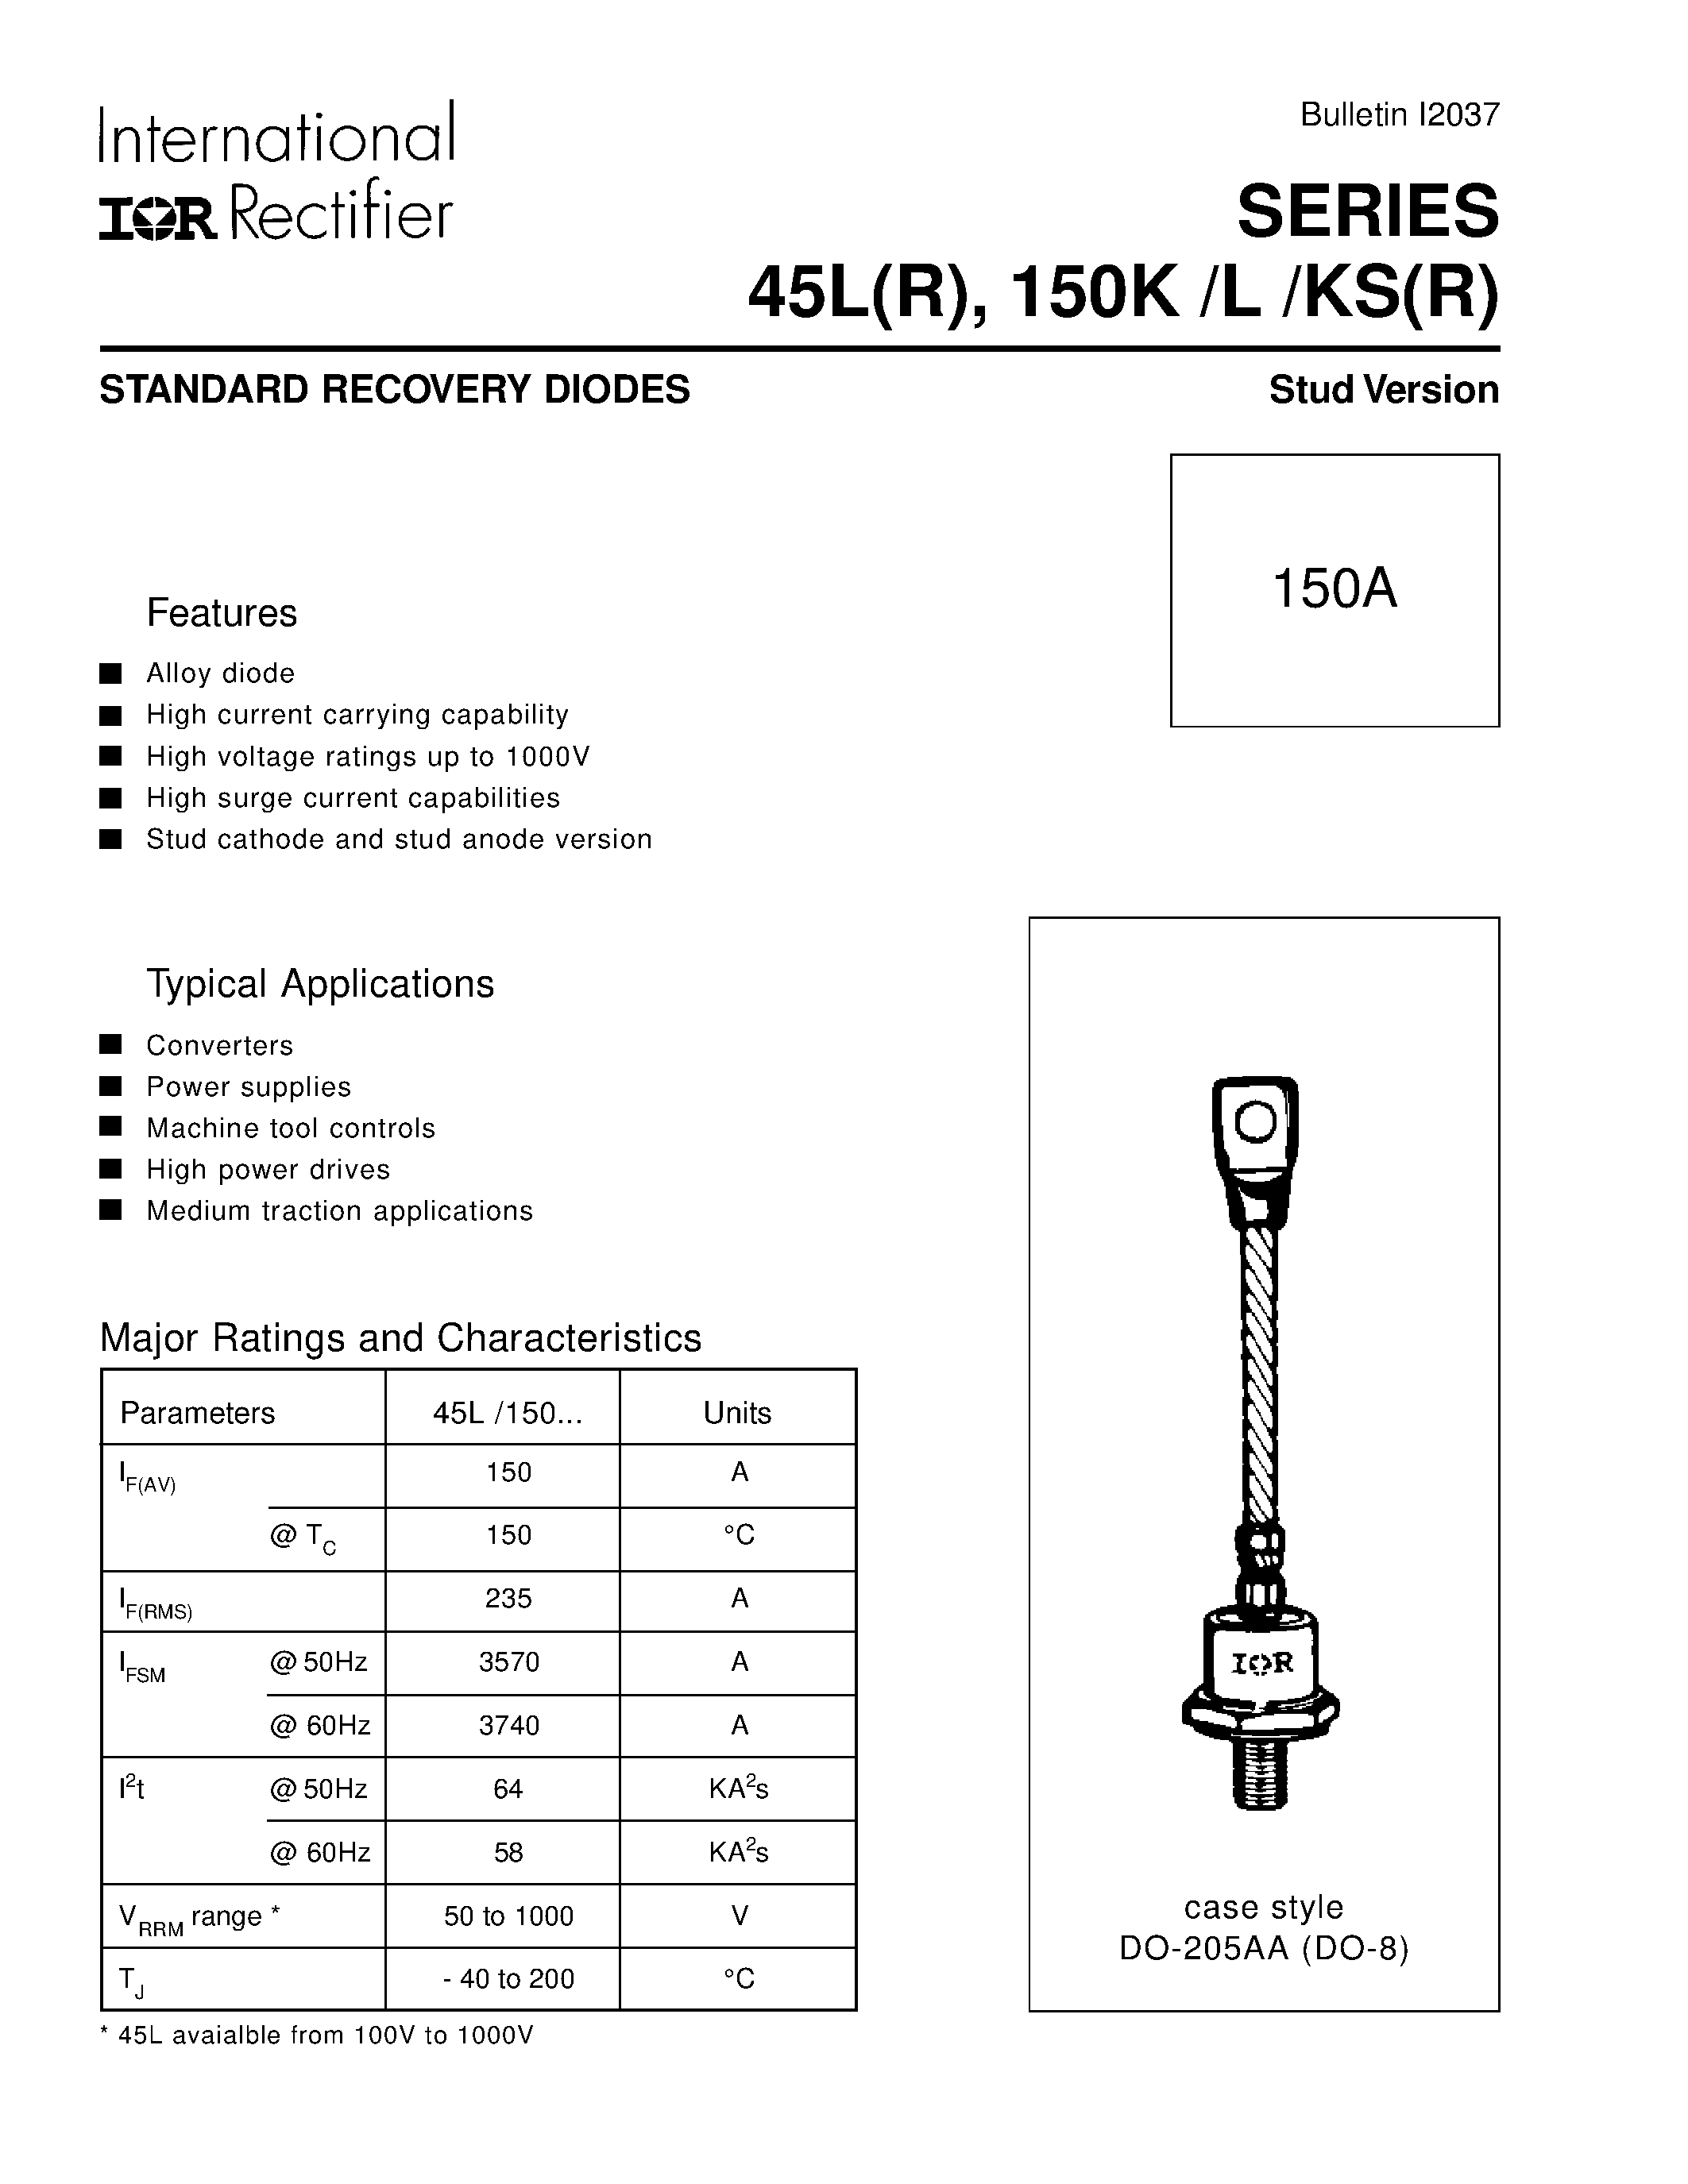 Даташит 45L(R) - STANDARD RECOVERY DIODES Stud Version страница 1